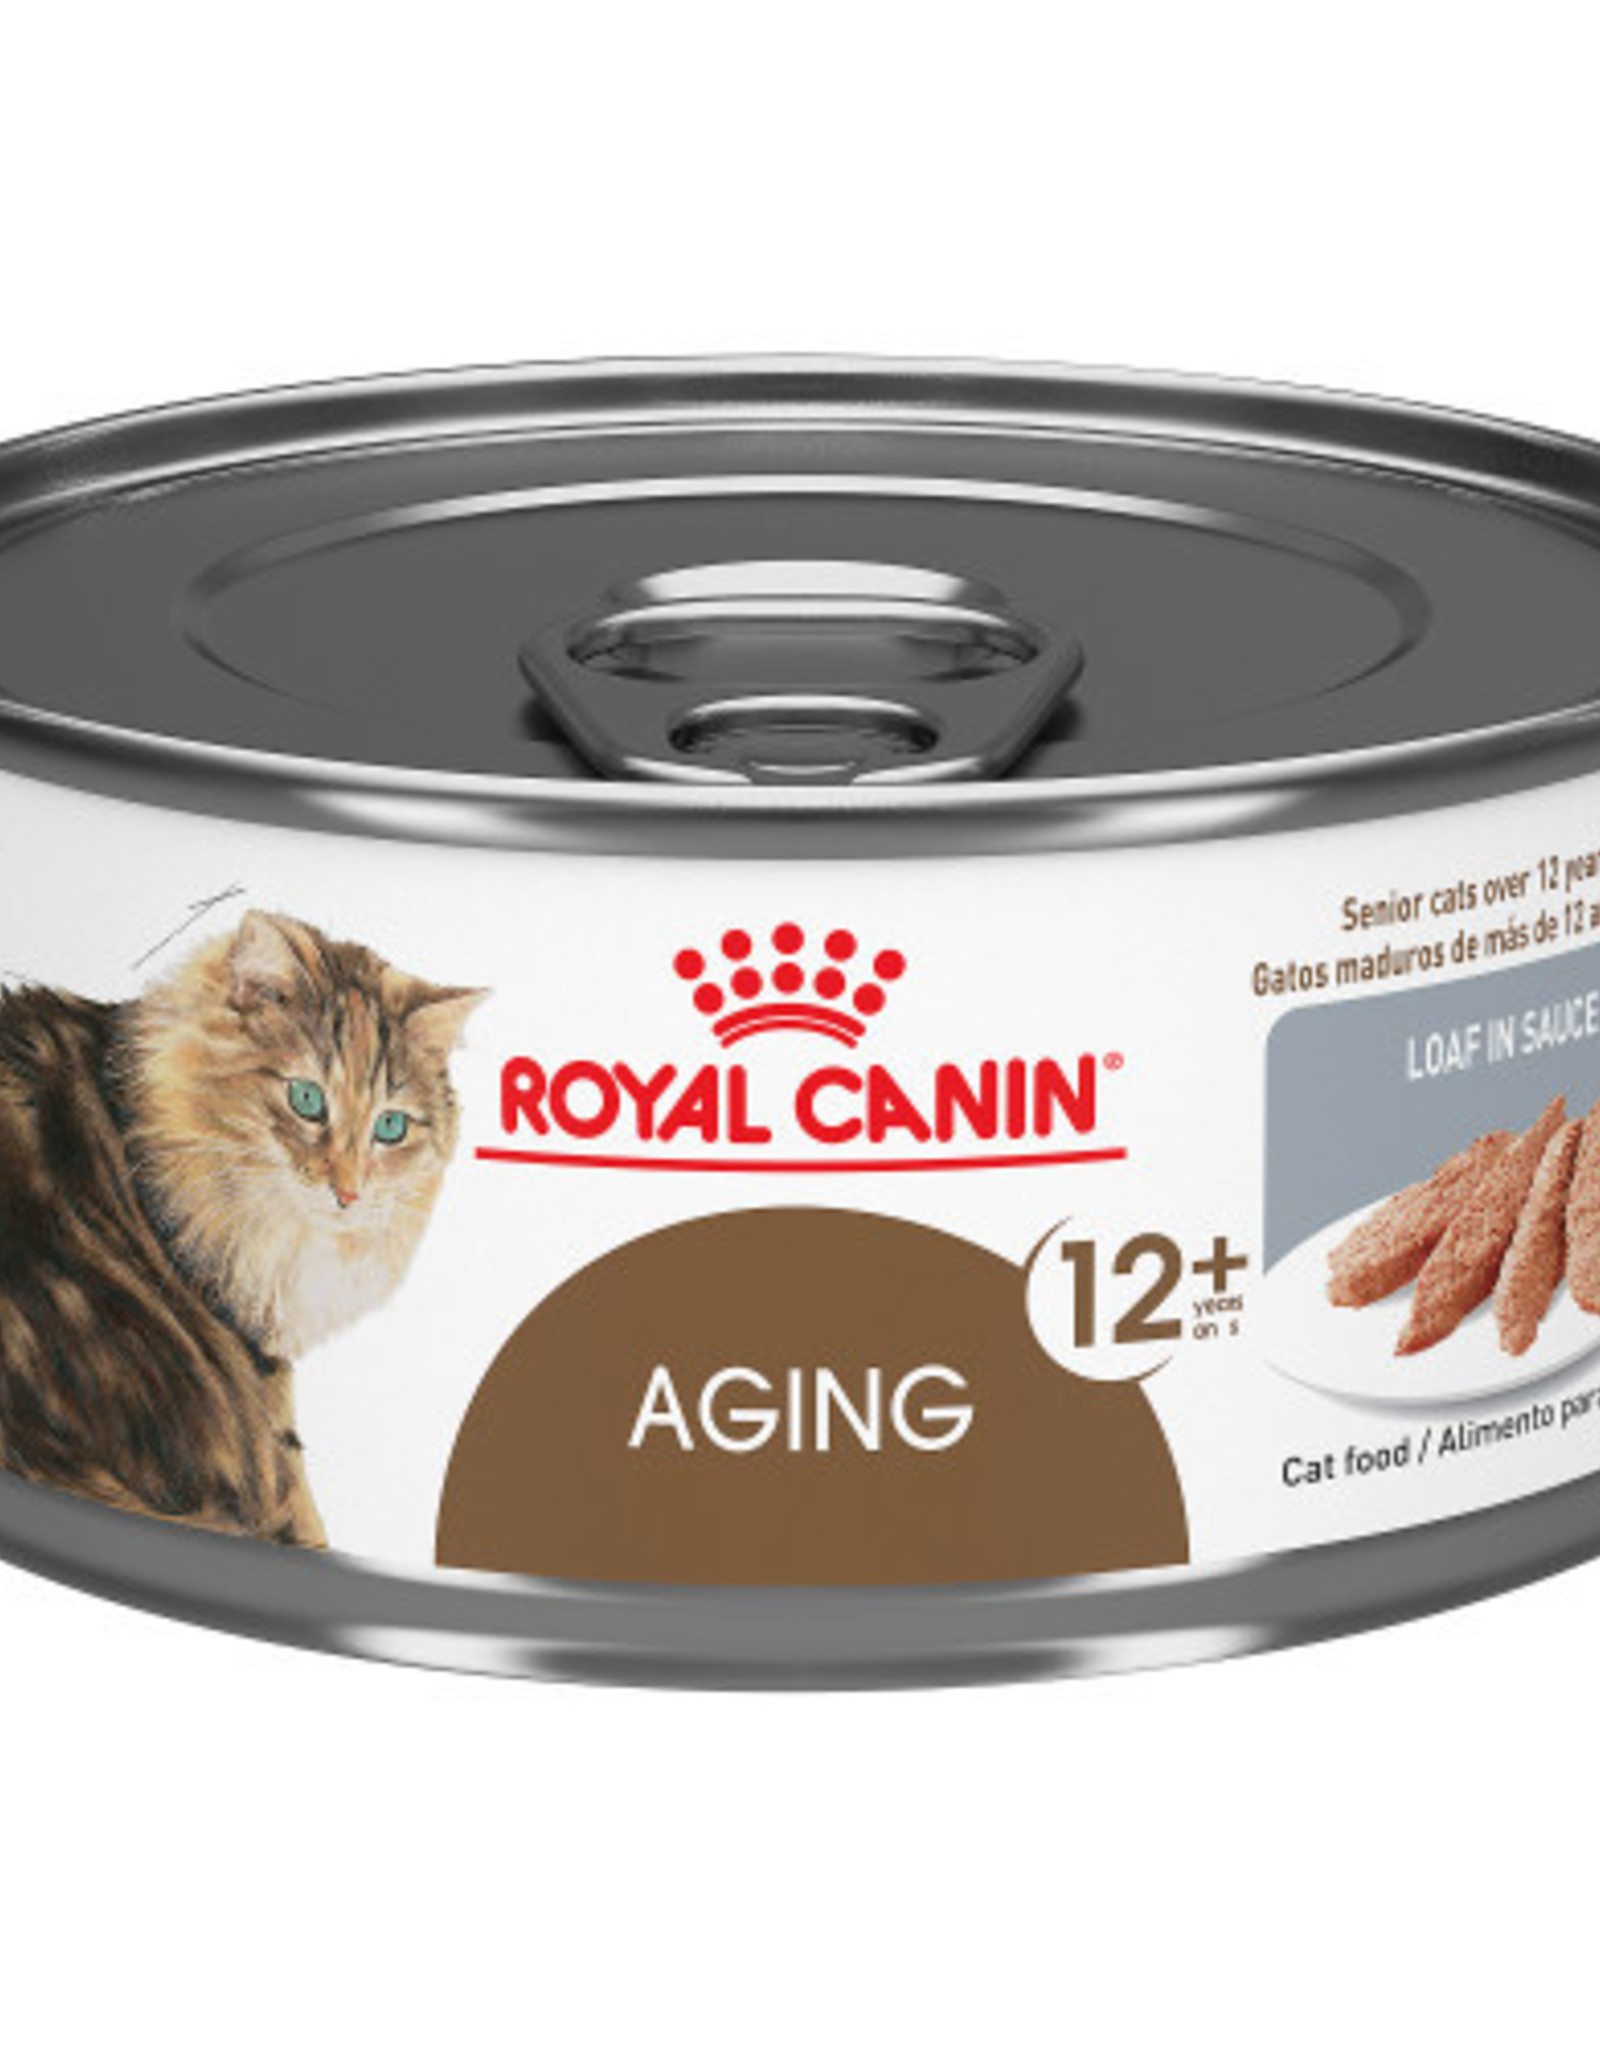 ROYAL CANIN ROYAL CANIN AGING CAT 12+ CAN 3OZ CASE OF 24